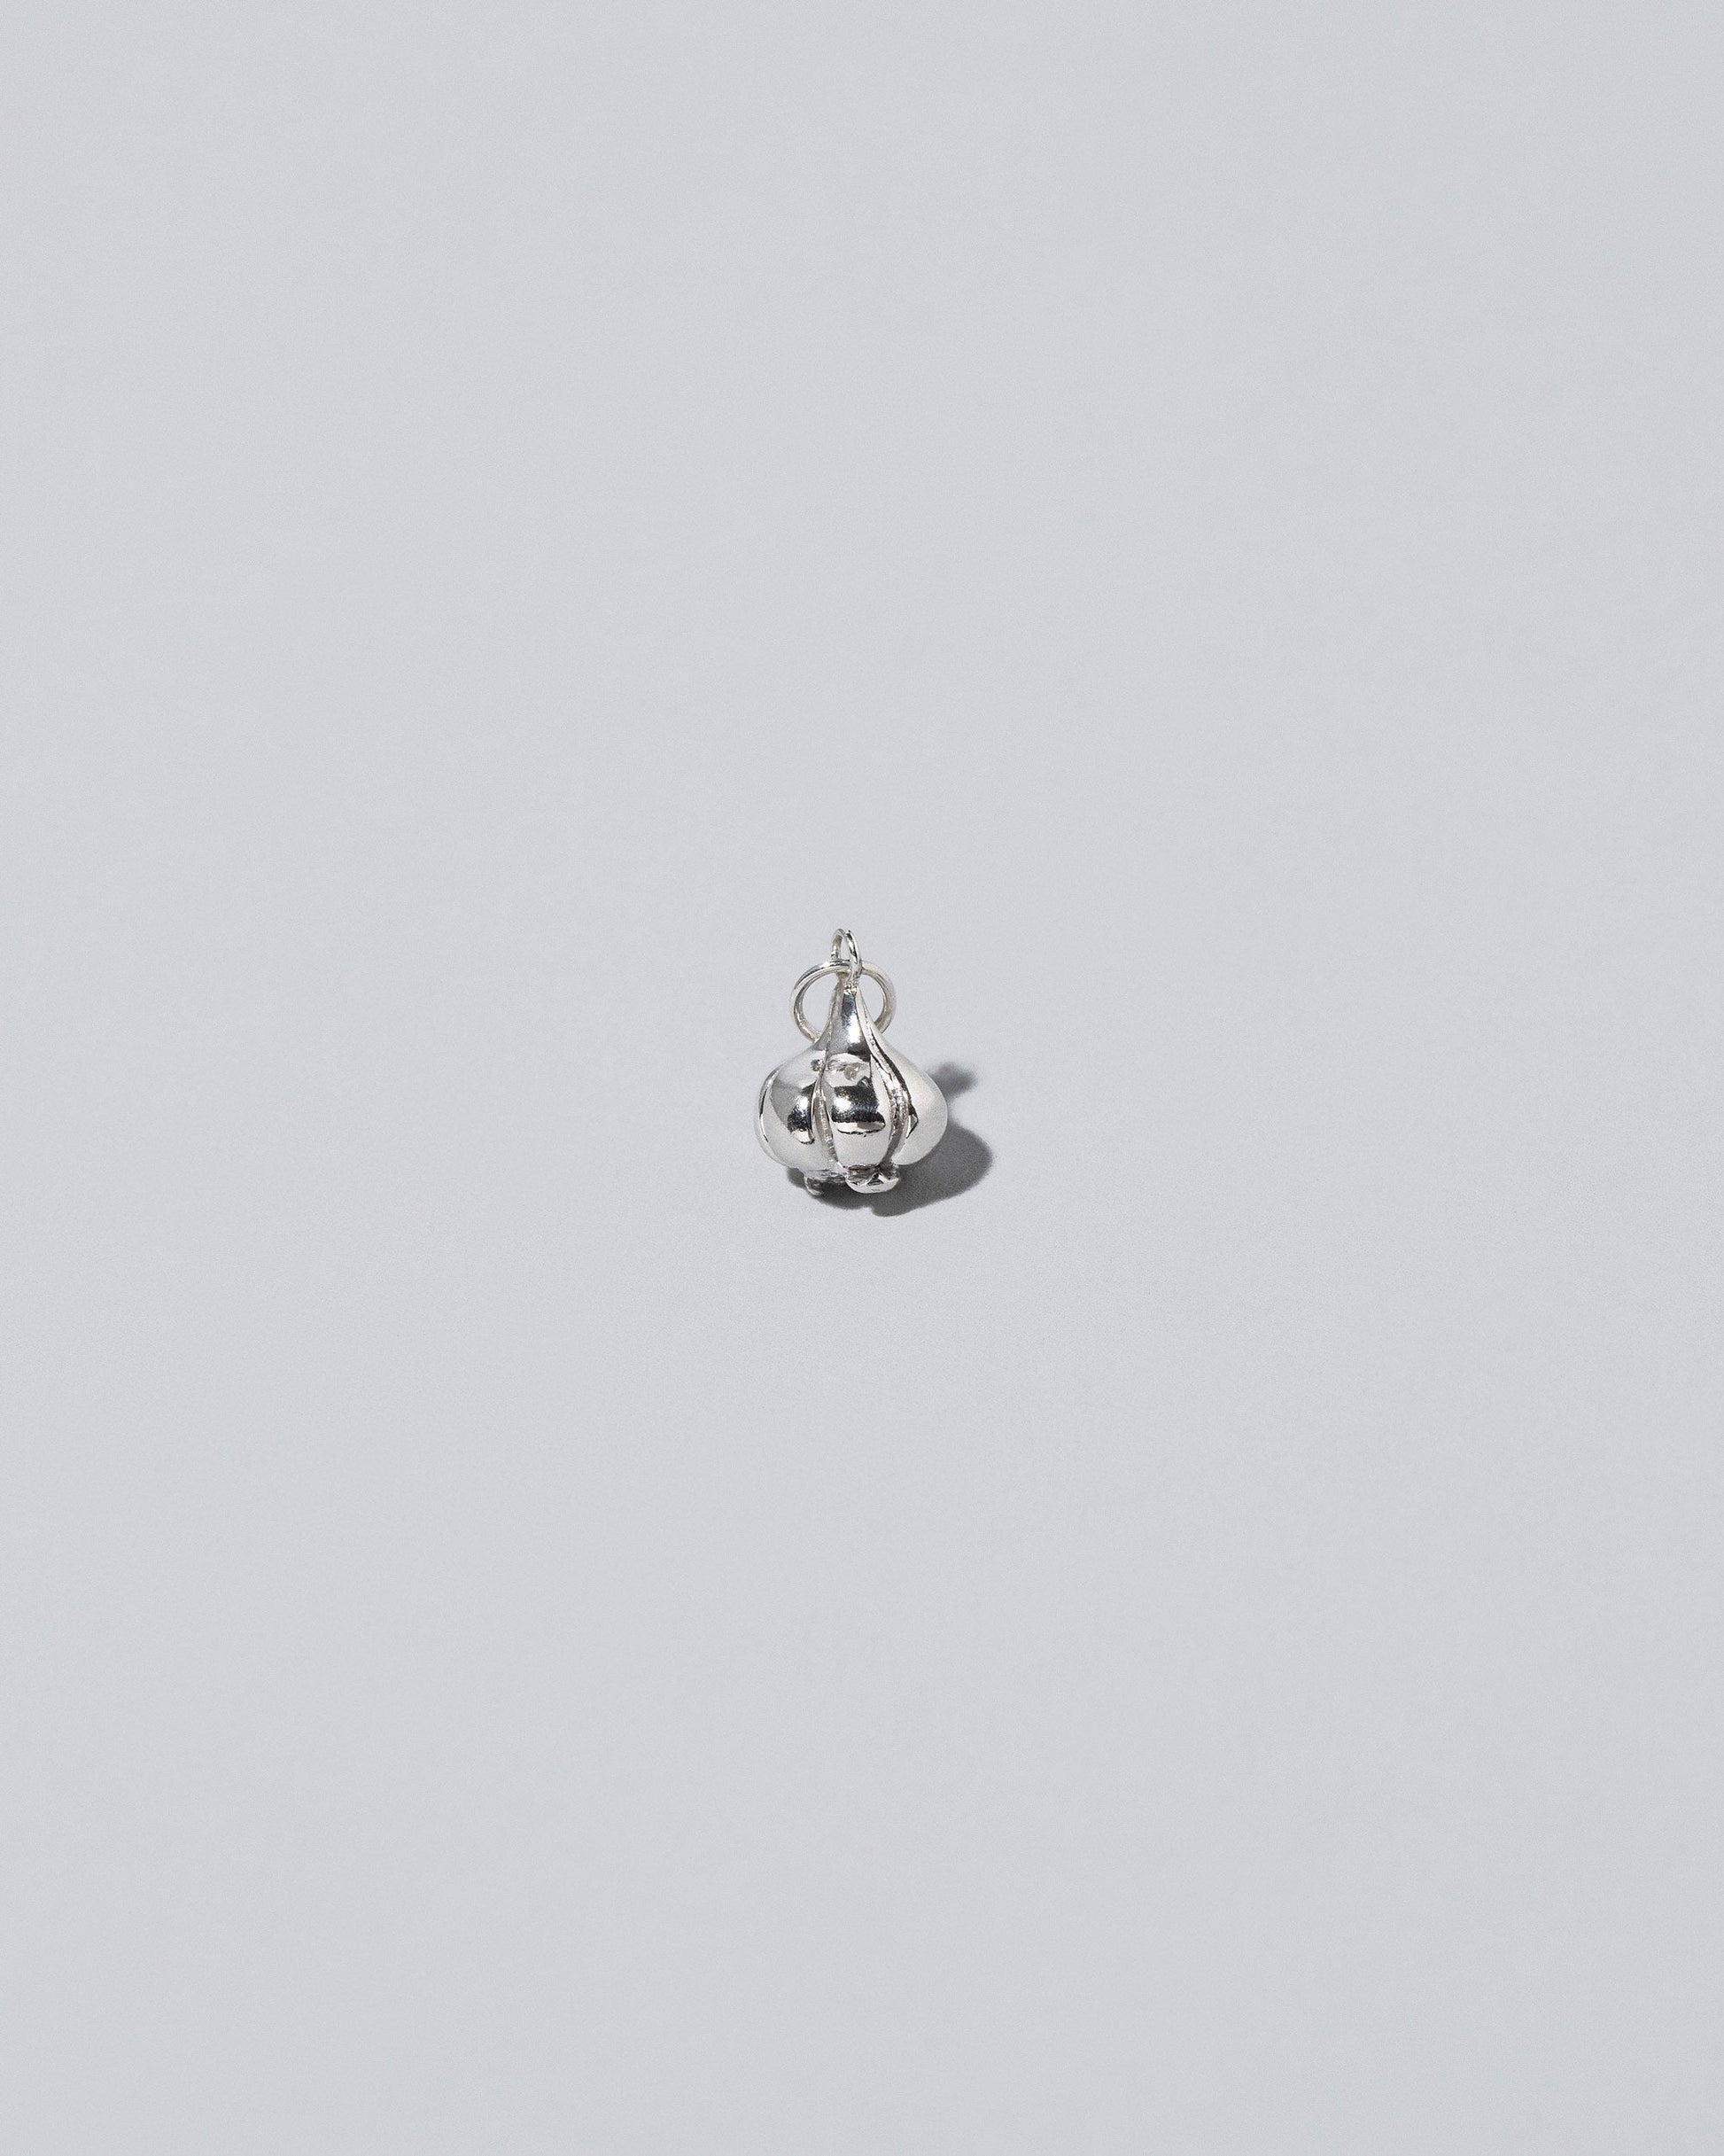 Silver garlic charm on light colored background